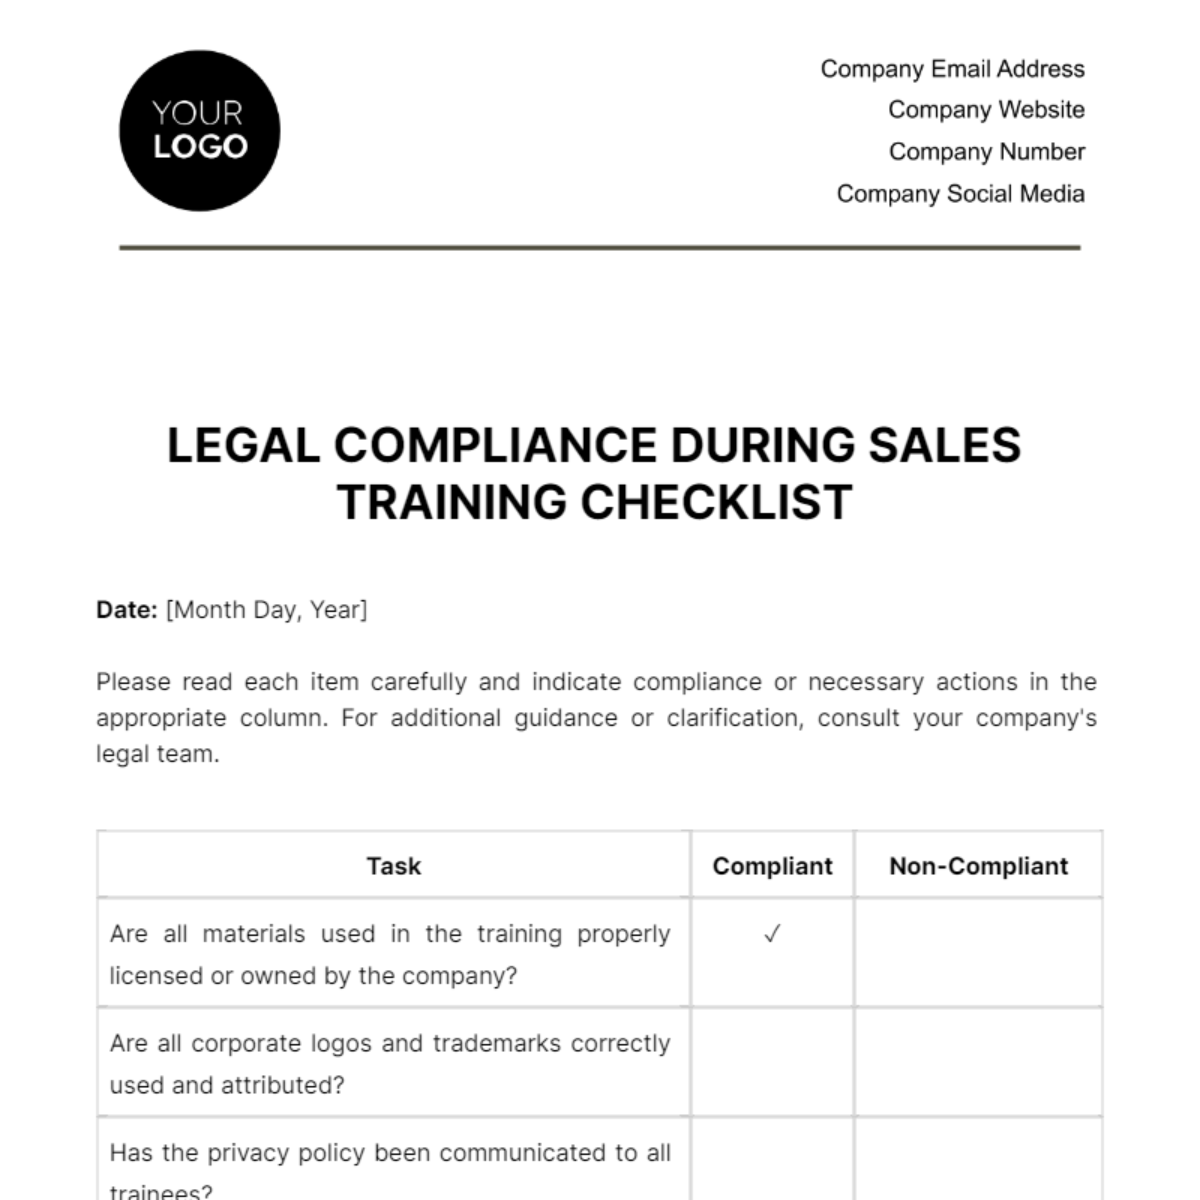 Legal Compliance During Sales Training Checklist Template